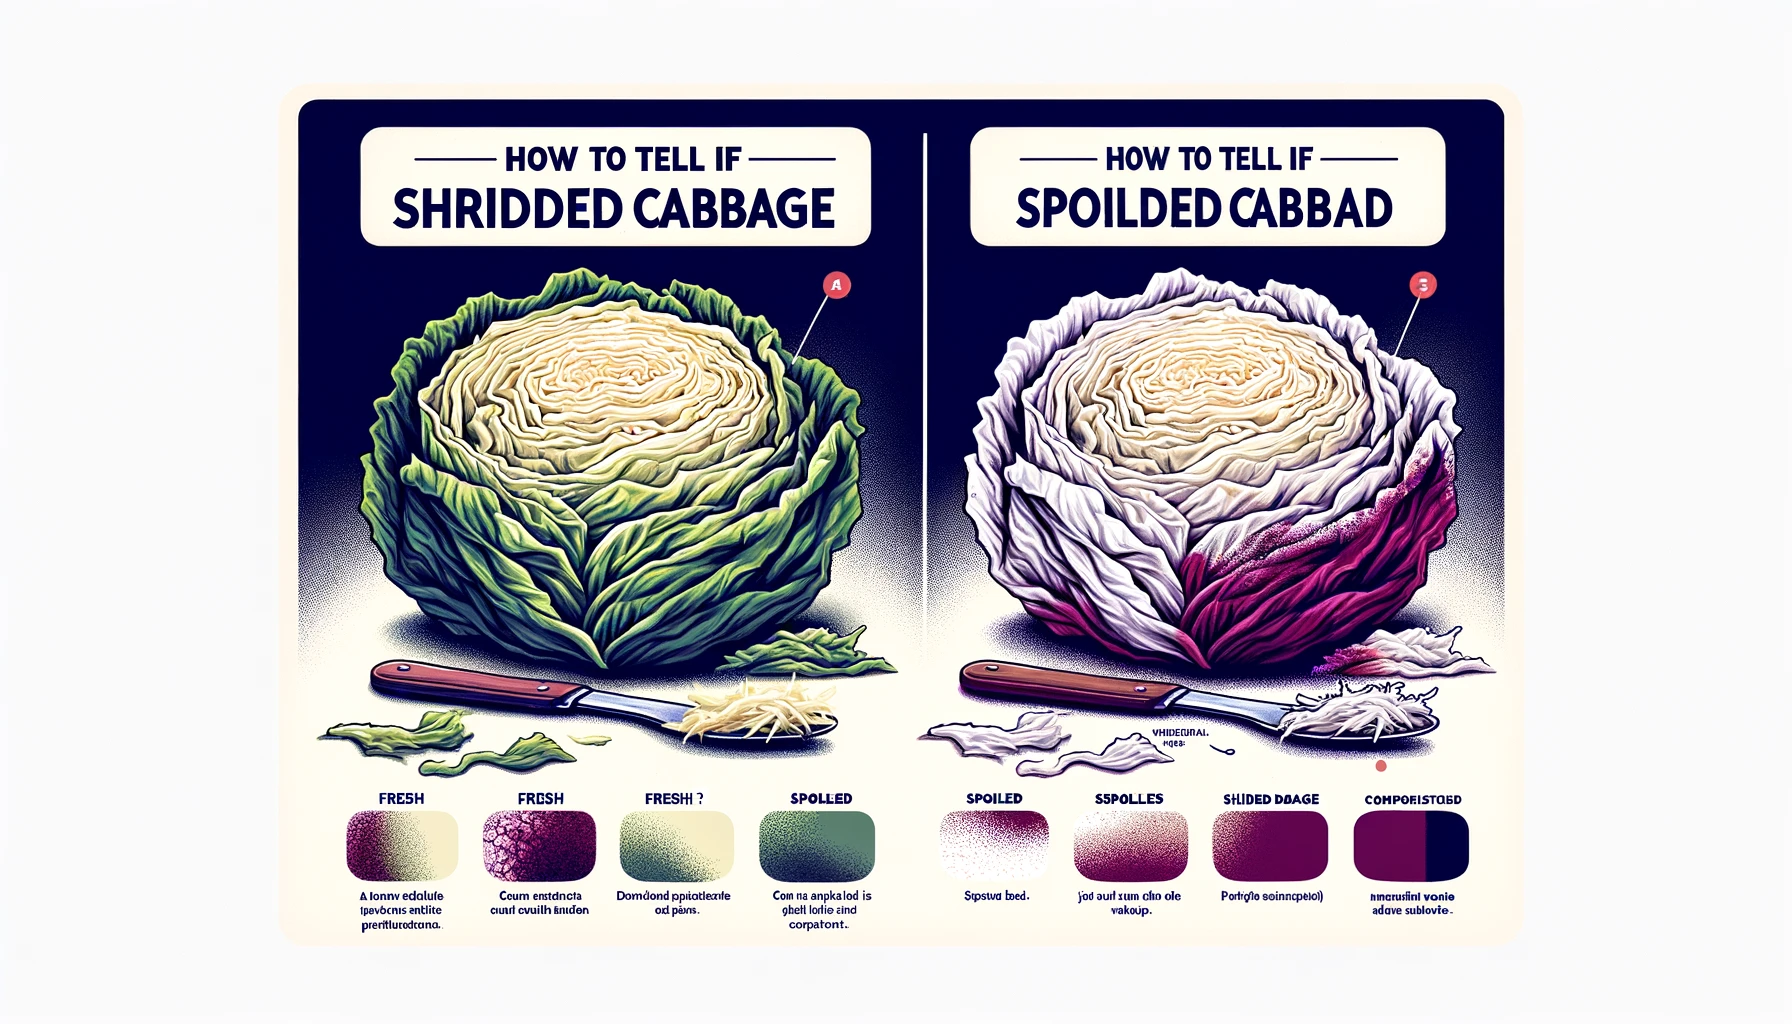 To Tell If Shredded Cabbage is Bad